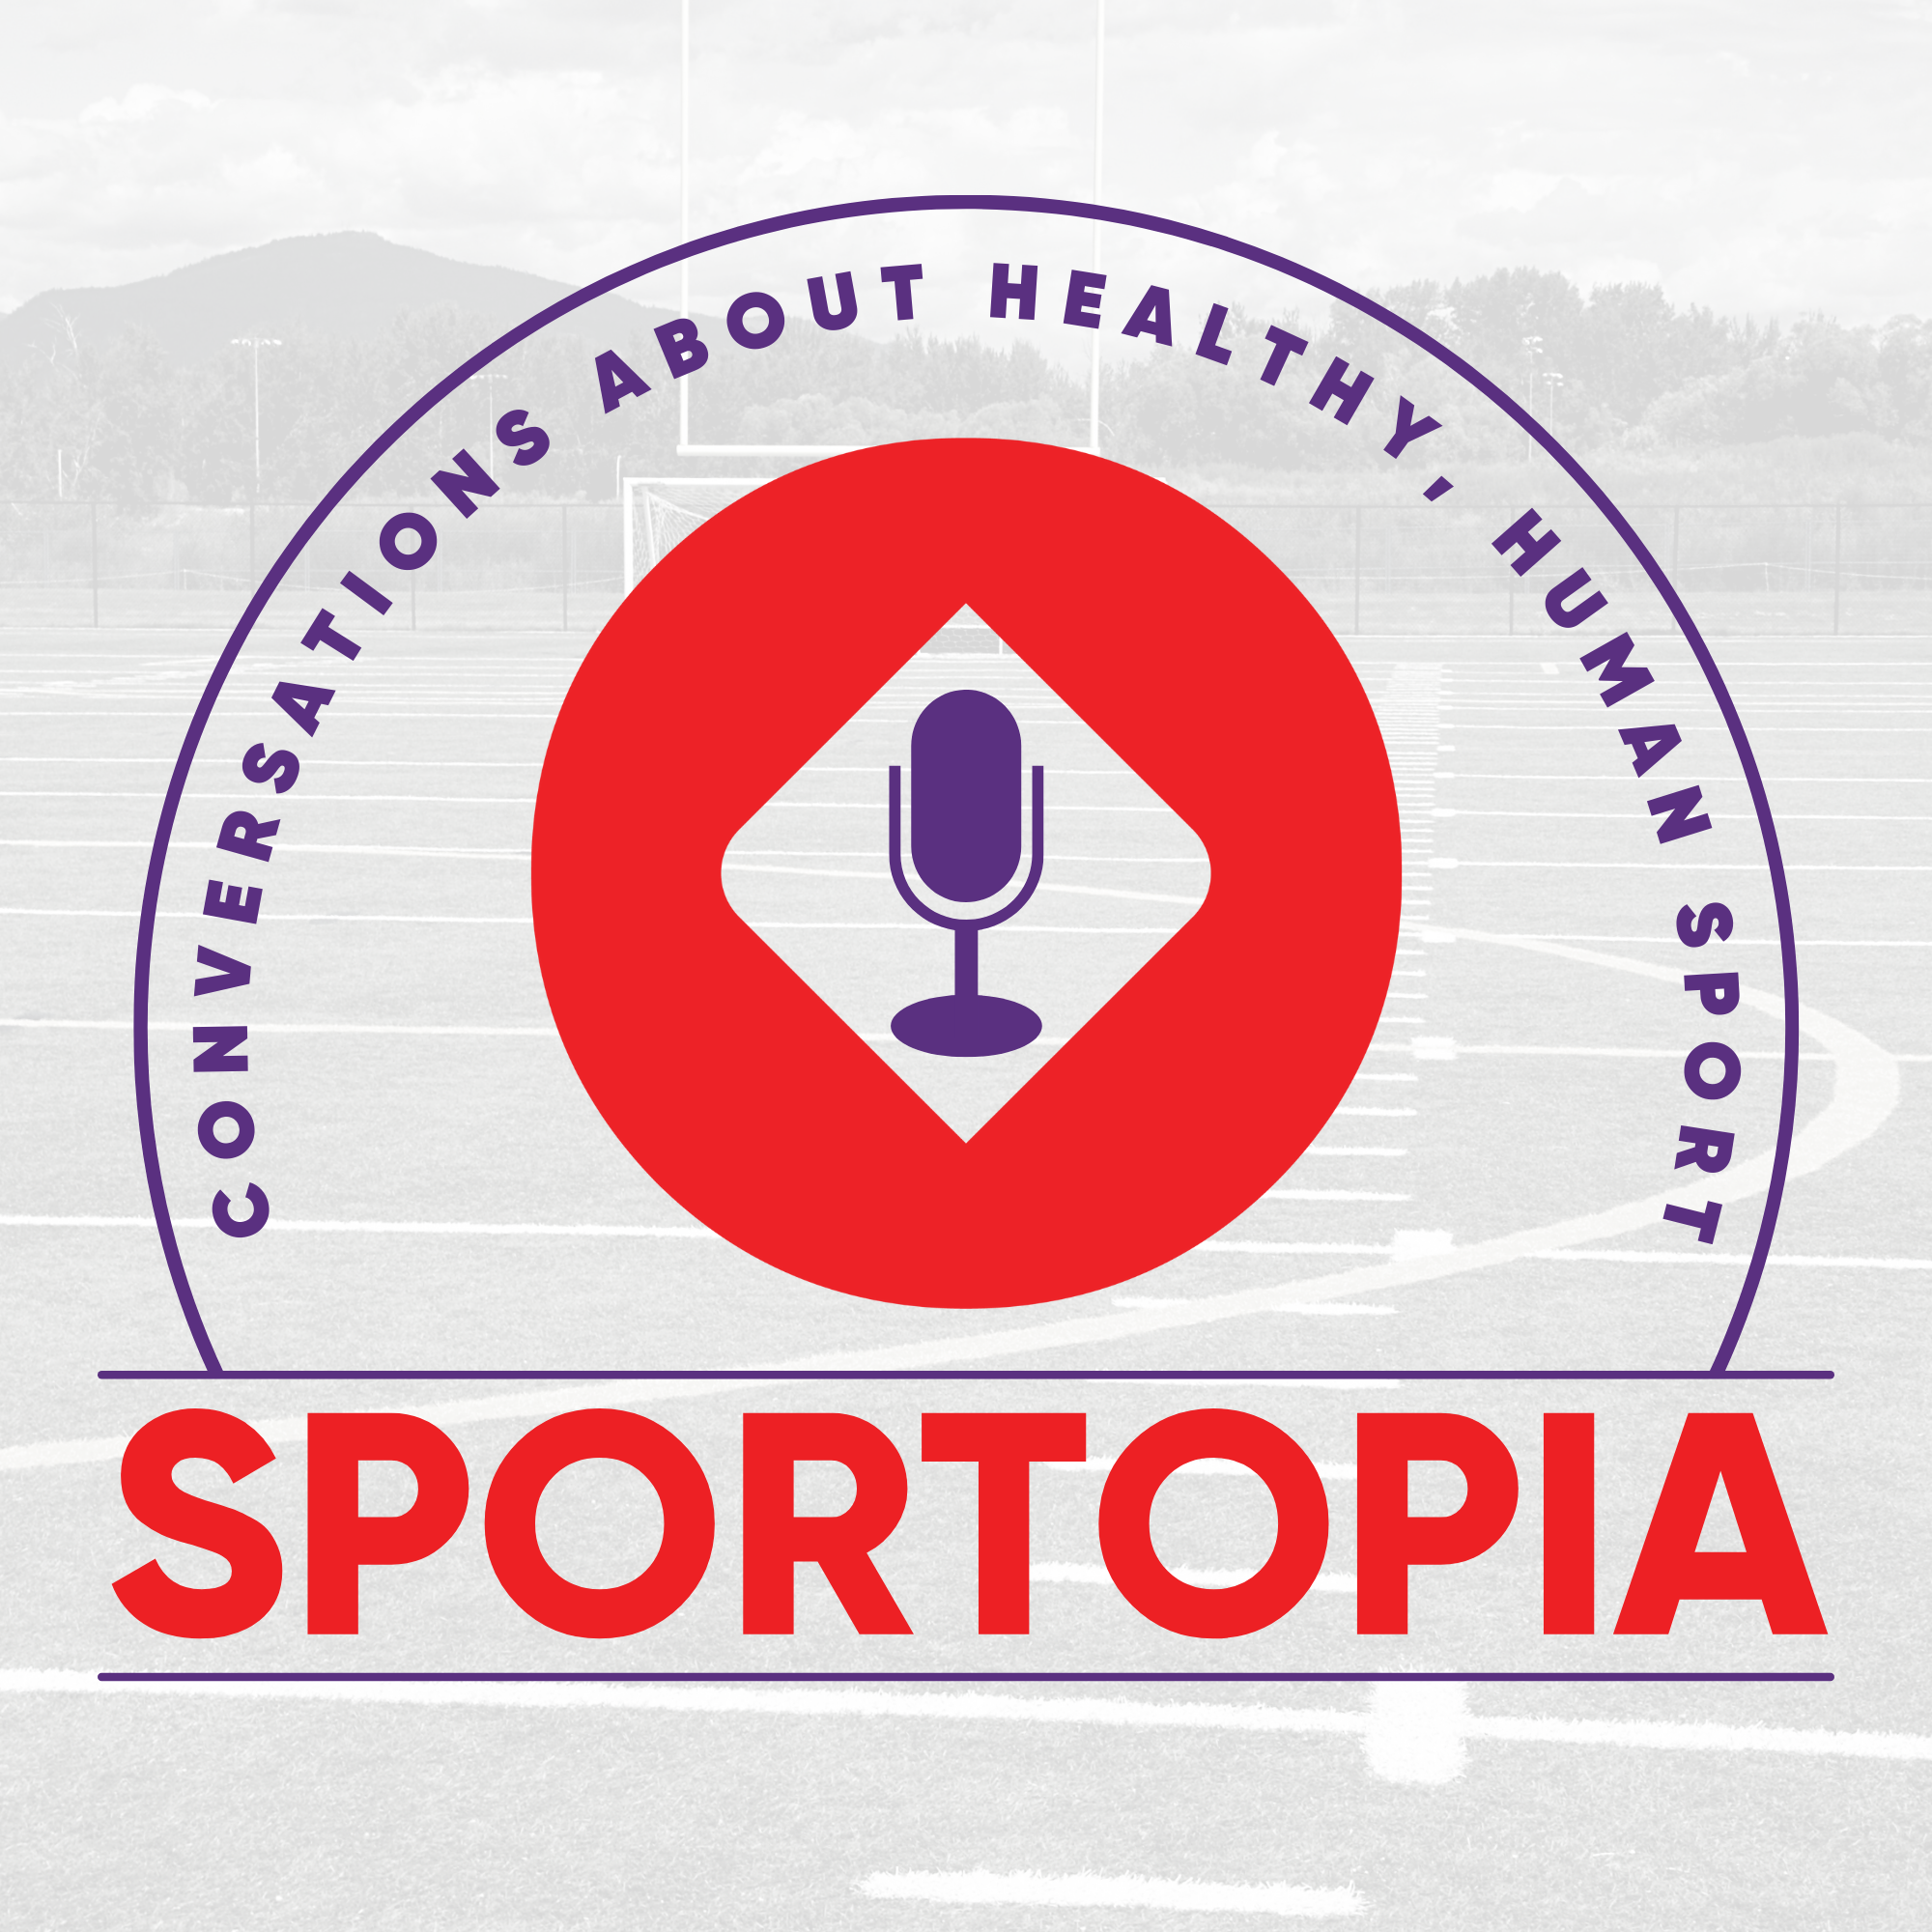 Episode 18 - Inspiring Hope in Sport: An Update from the Hope on the Horizon Tour